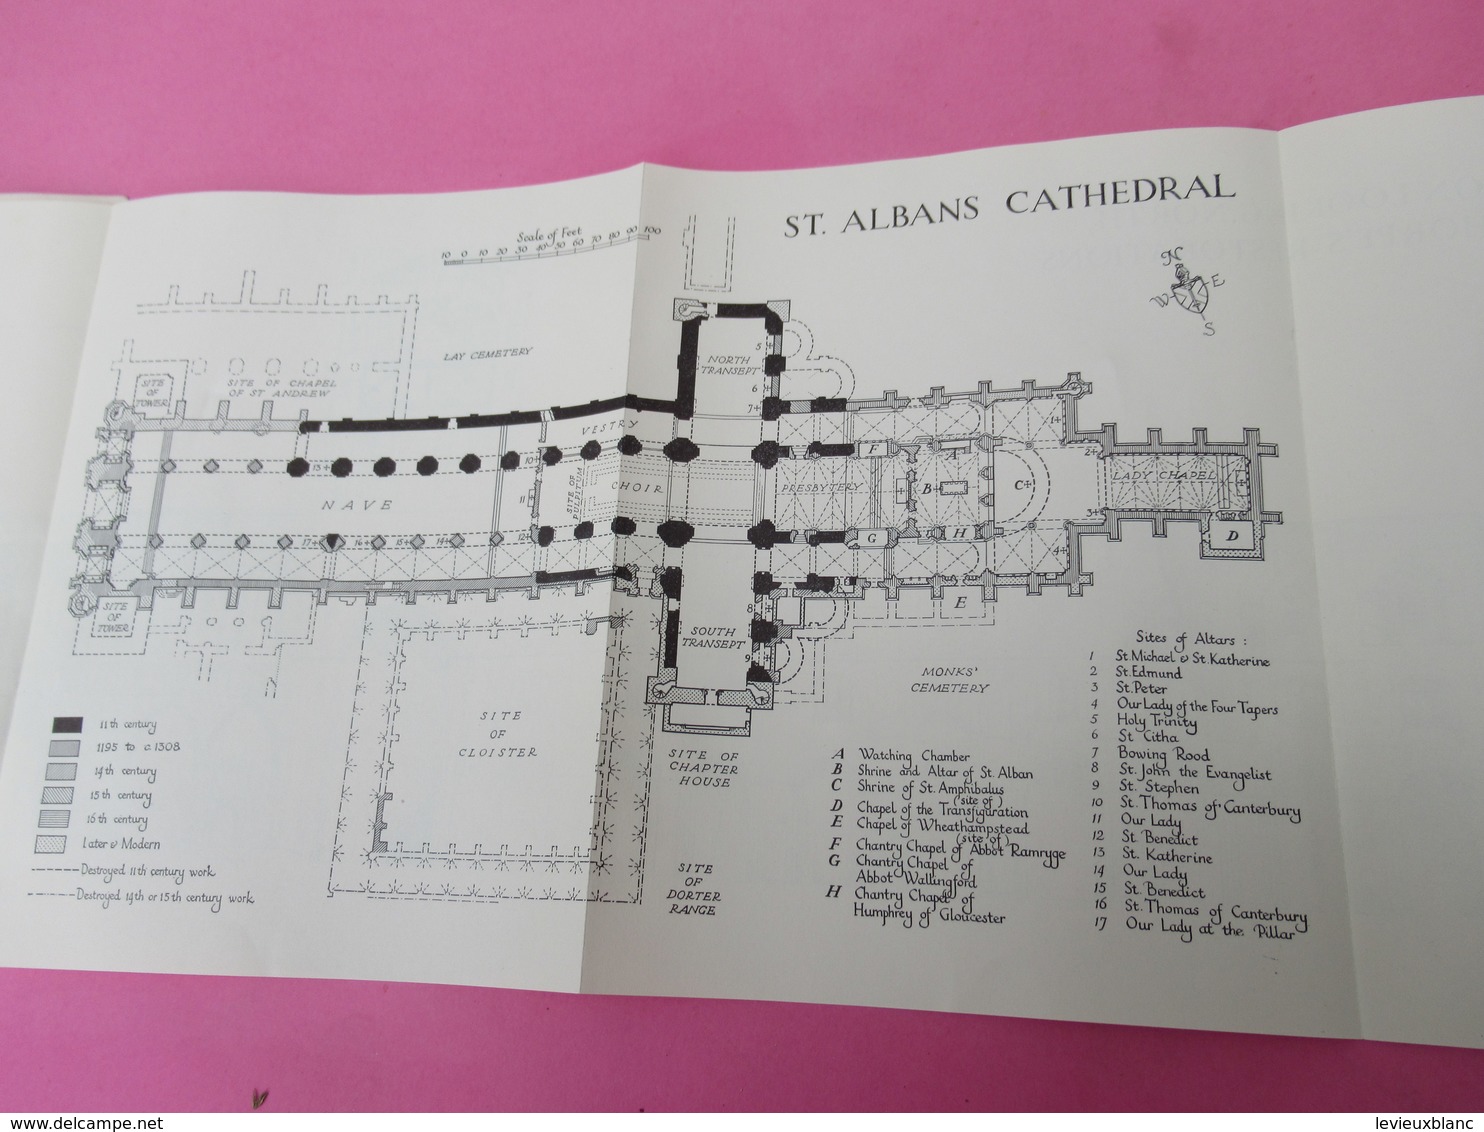 Guide/ANGLETERRE/ a Guide to SAINT ALBANS CATHEDRAL/London her Majesty's stationery Office/1956     PGC339